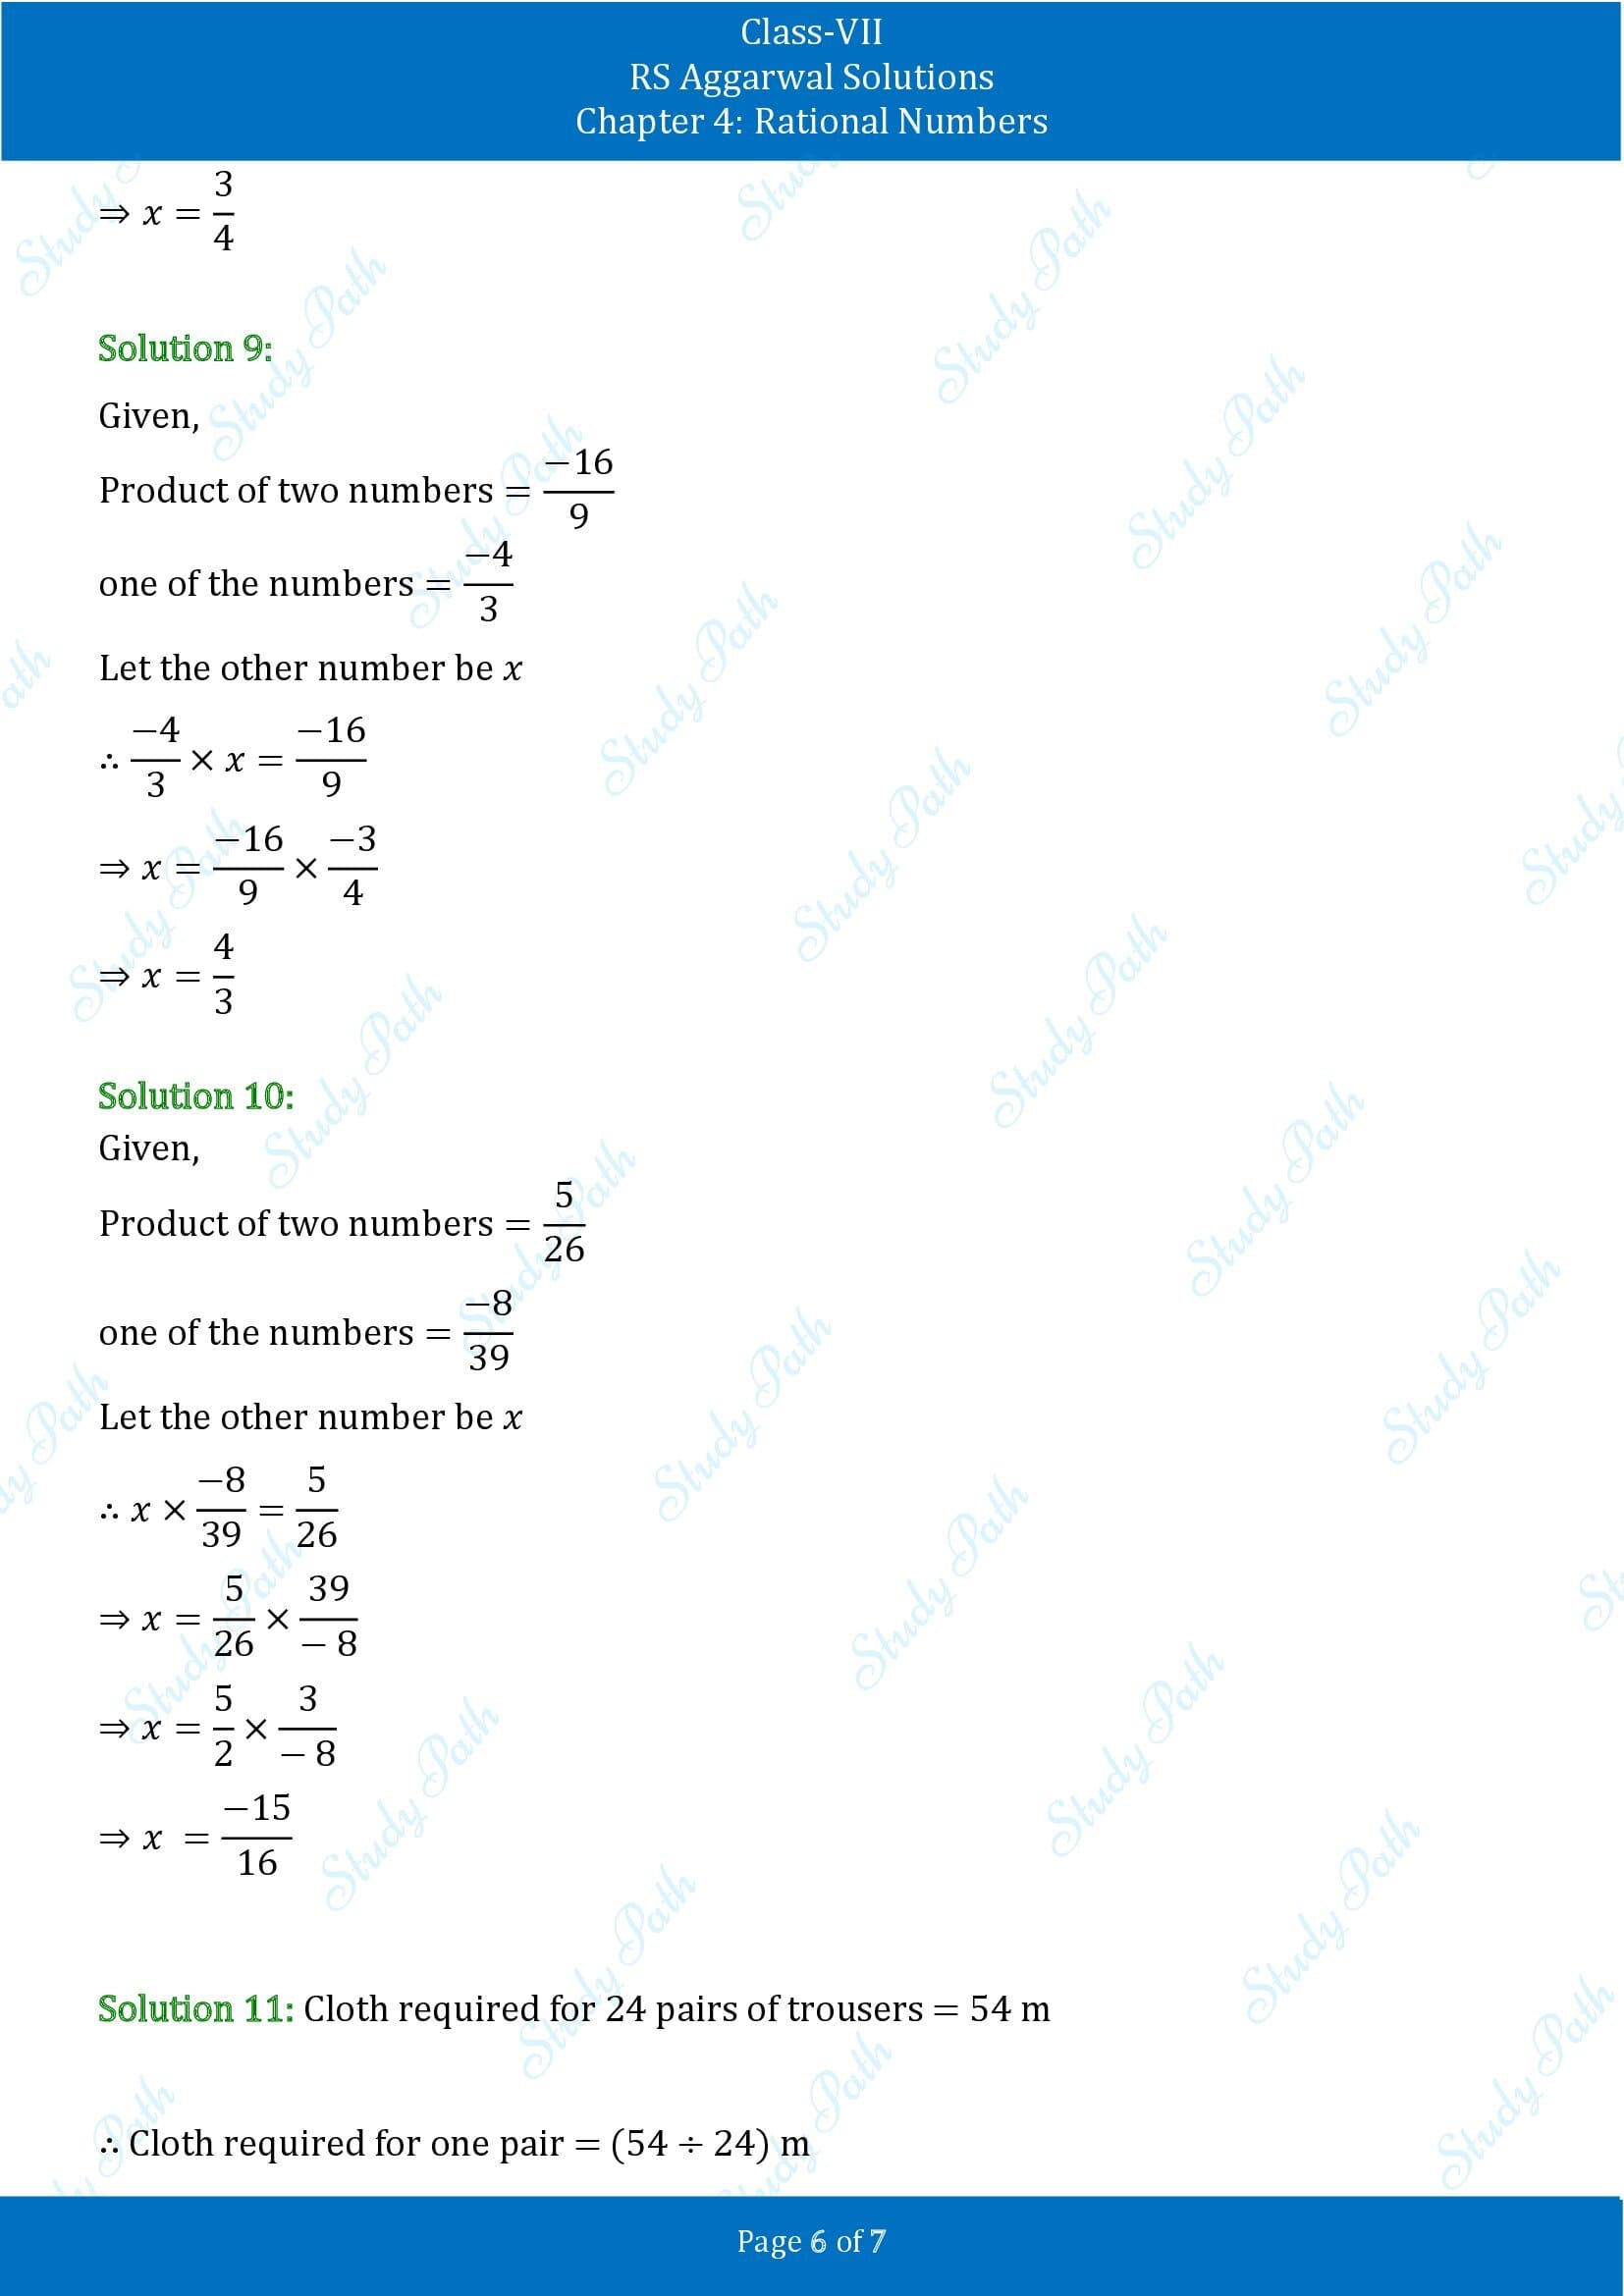 RS Aggarwal Solutions Class 7 Chapter 4 Rational Numbers Exercise 4F 00006